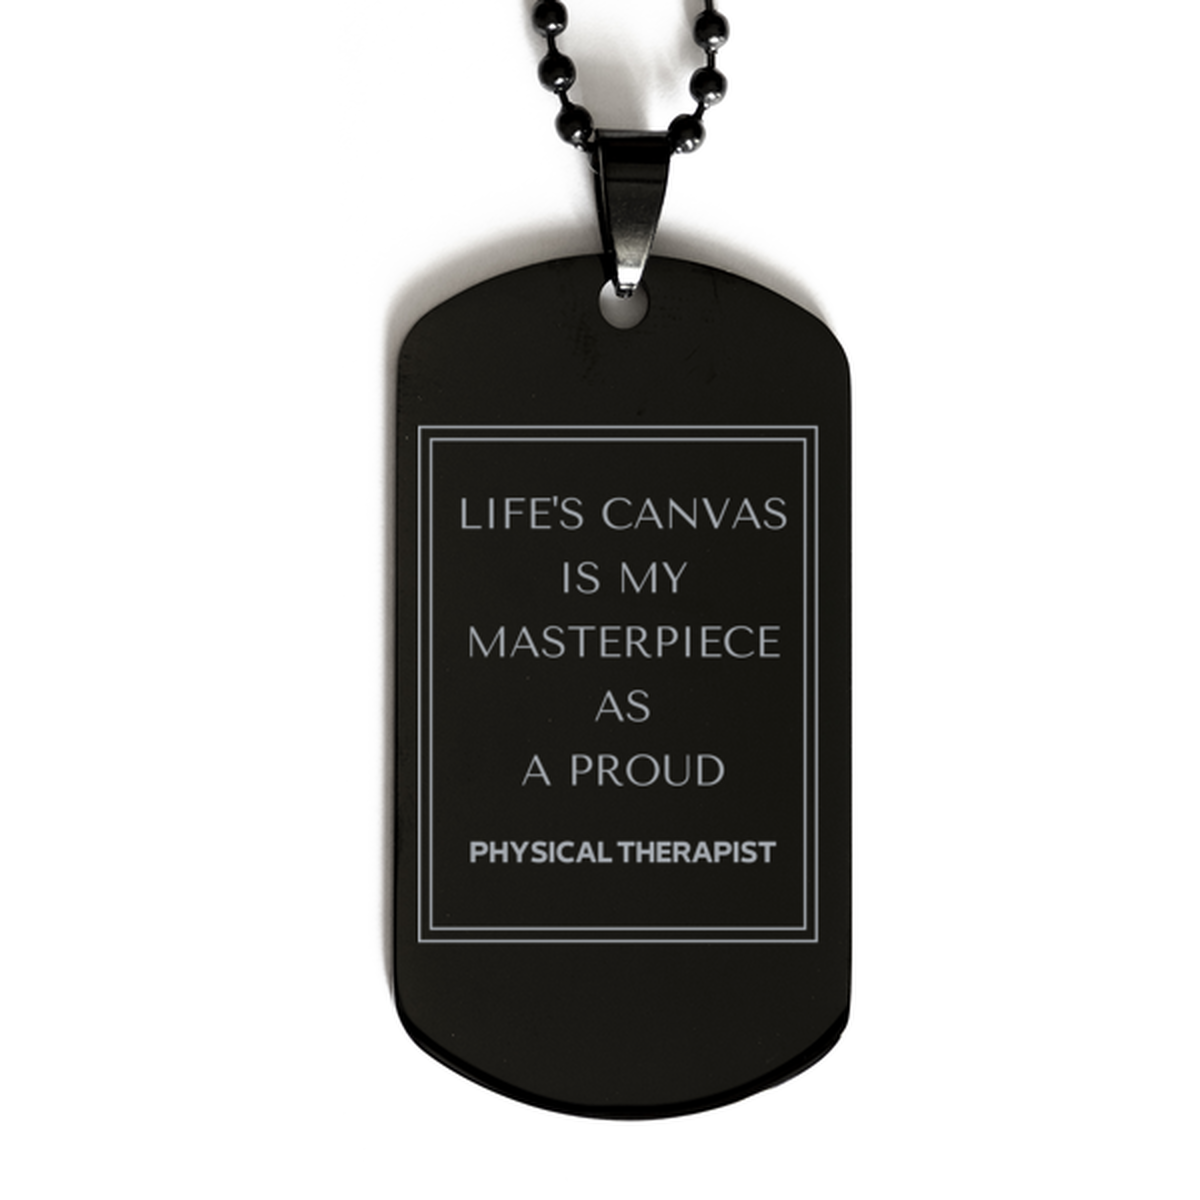 Proud Physical Therapist Gifts, Life's canvas is my masterpiece, Epic Birthday Christmas Unique Black Dog Tag For Physical Therapist, Coworkers, Men, Women, Friends